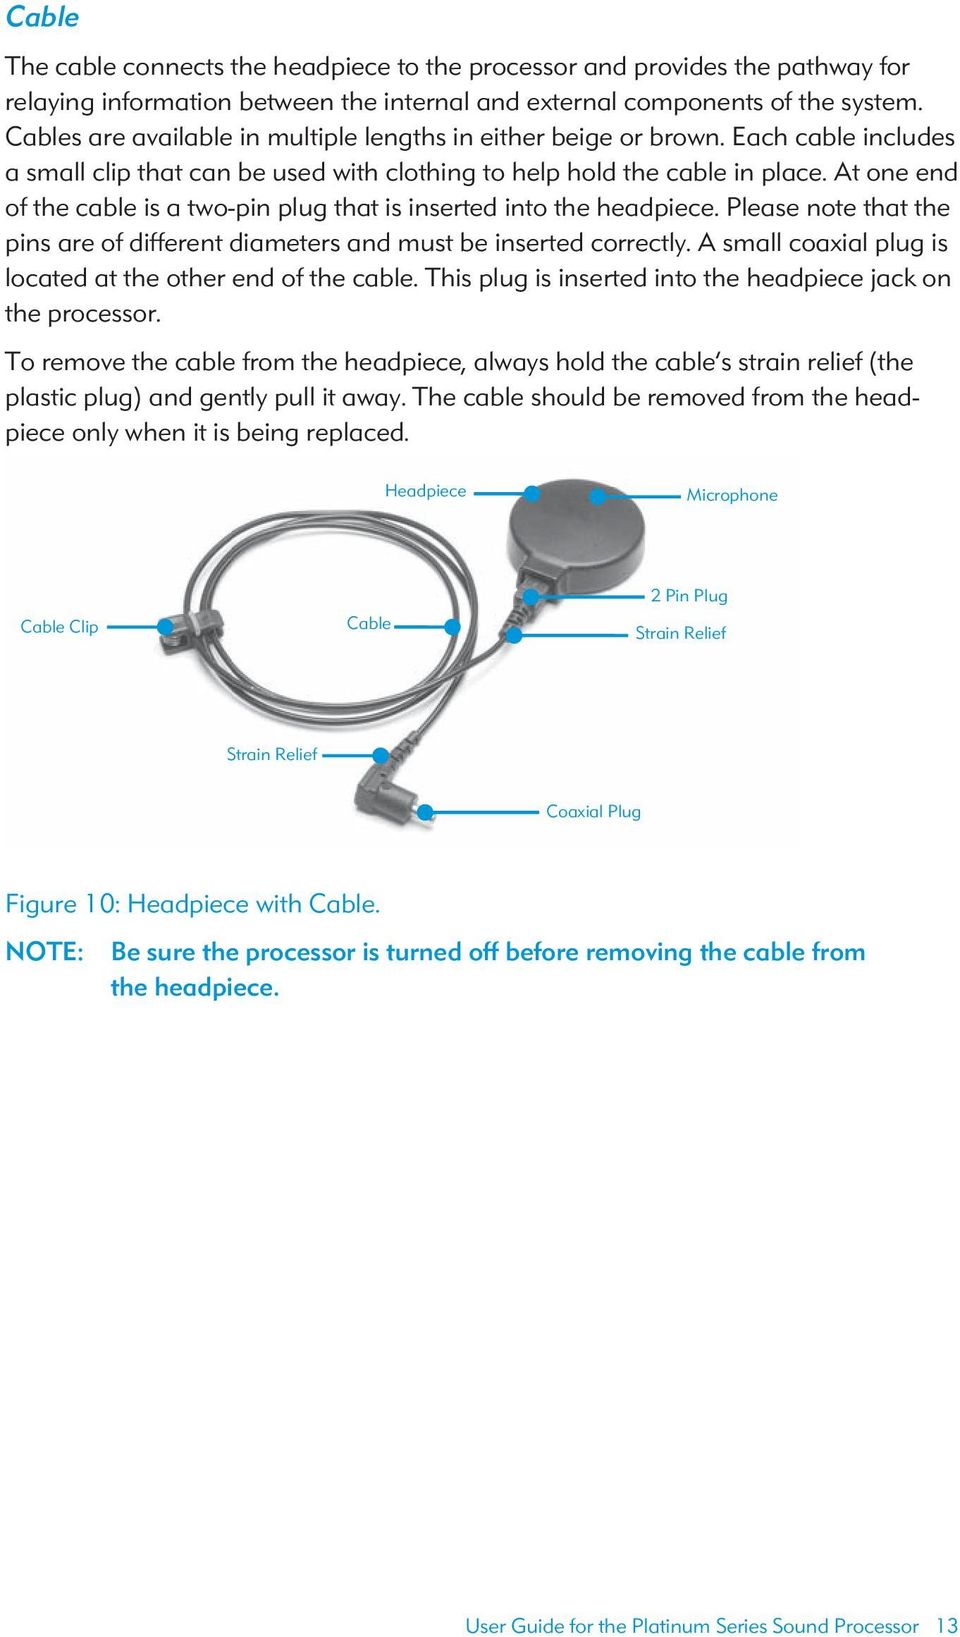 At one end of the cable is a two-pin plug that is inserted into the headpiece. Please note that the pins are of different diameters and must be inserted correctly.